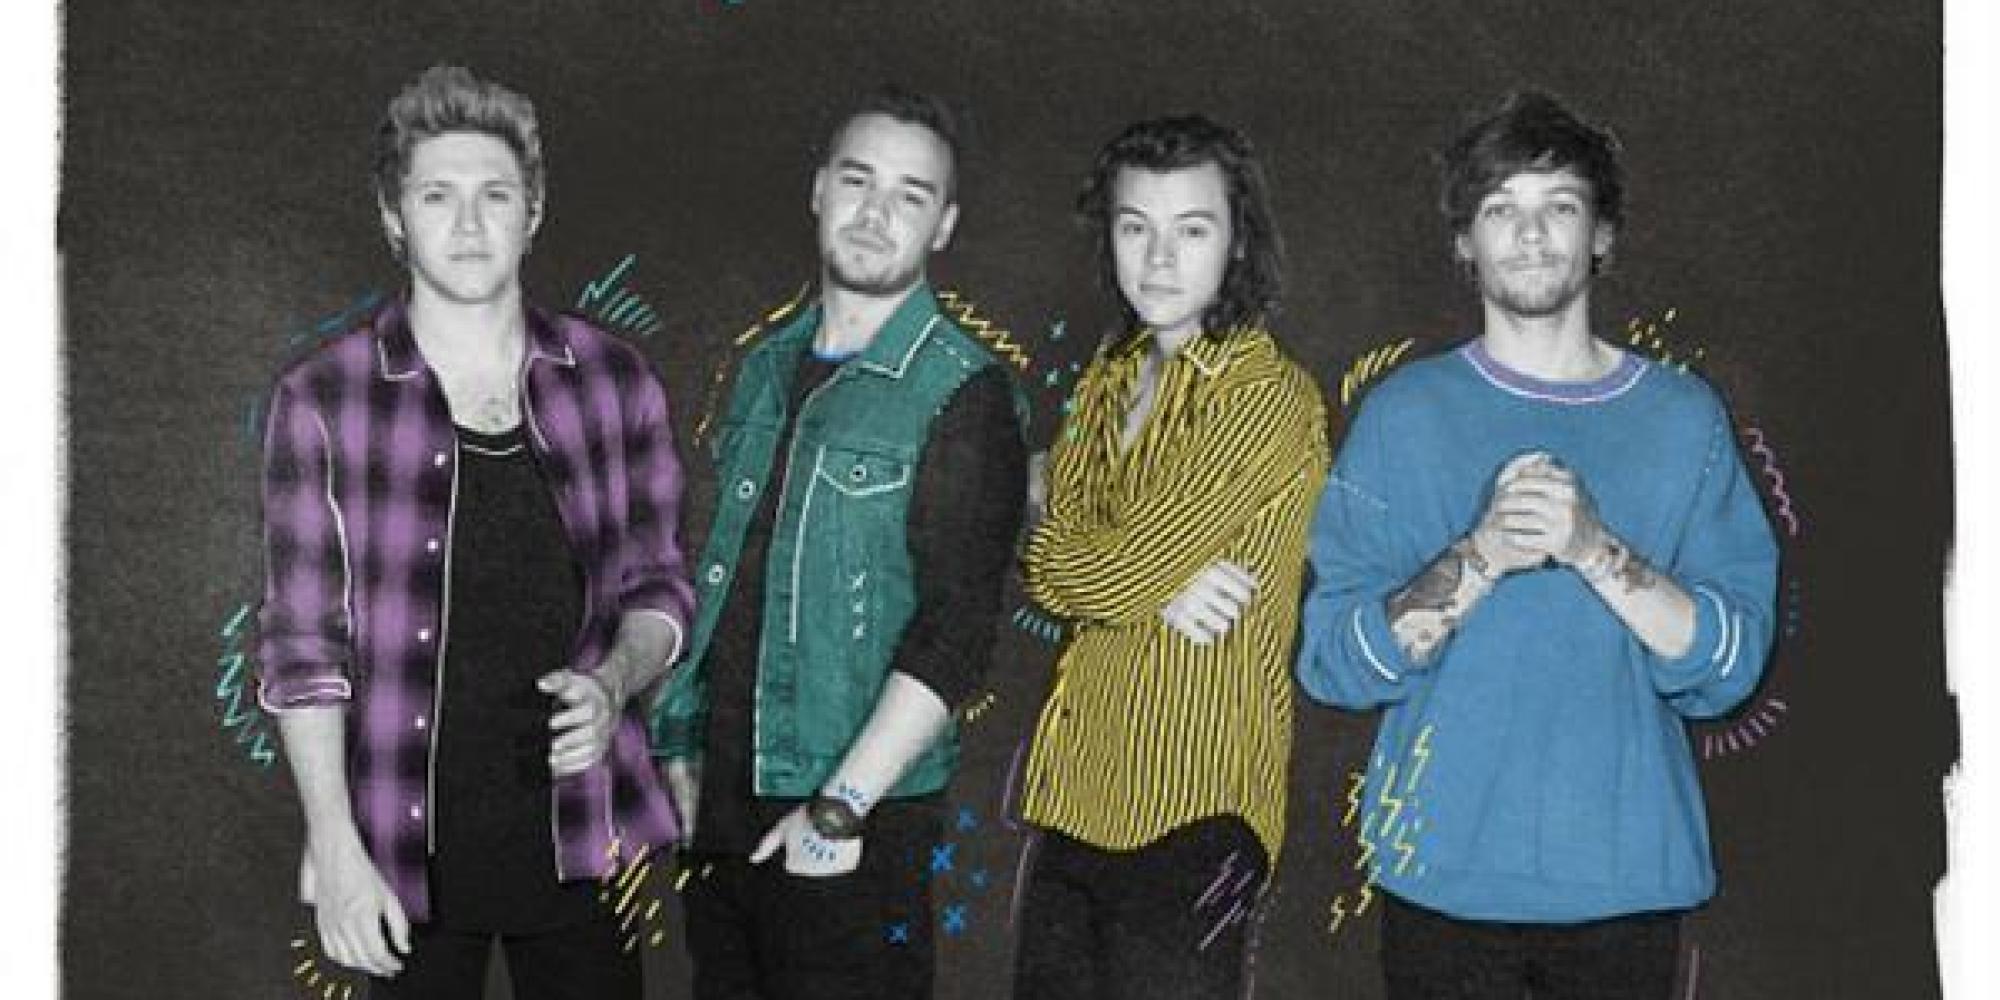 2000x1000 Free Download One Direction Release First Official Poster Without Zayn Malik Pic 2000x1000 For Your Desktop Mobile Tablet Explore One Direction Laptop Wallpaper 2022 One Direction Laptop Wallpaper